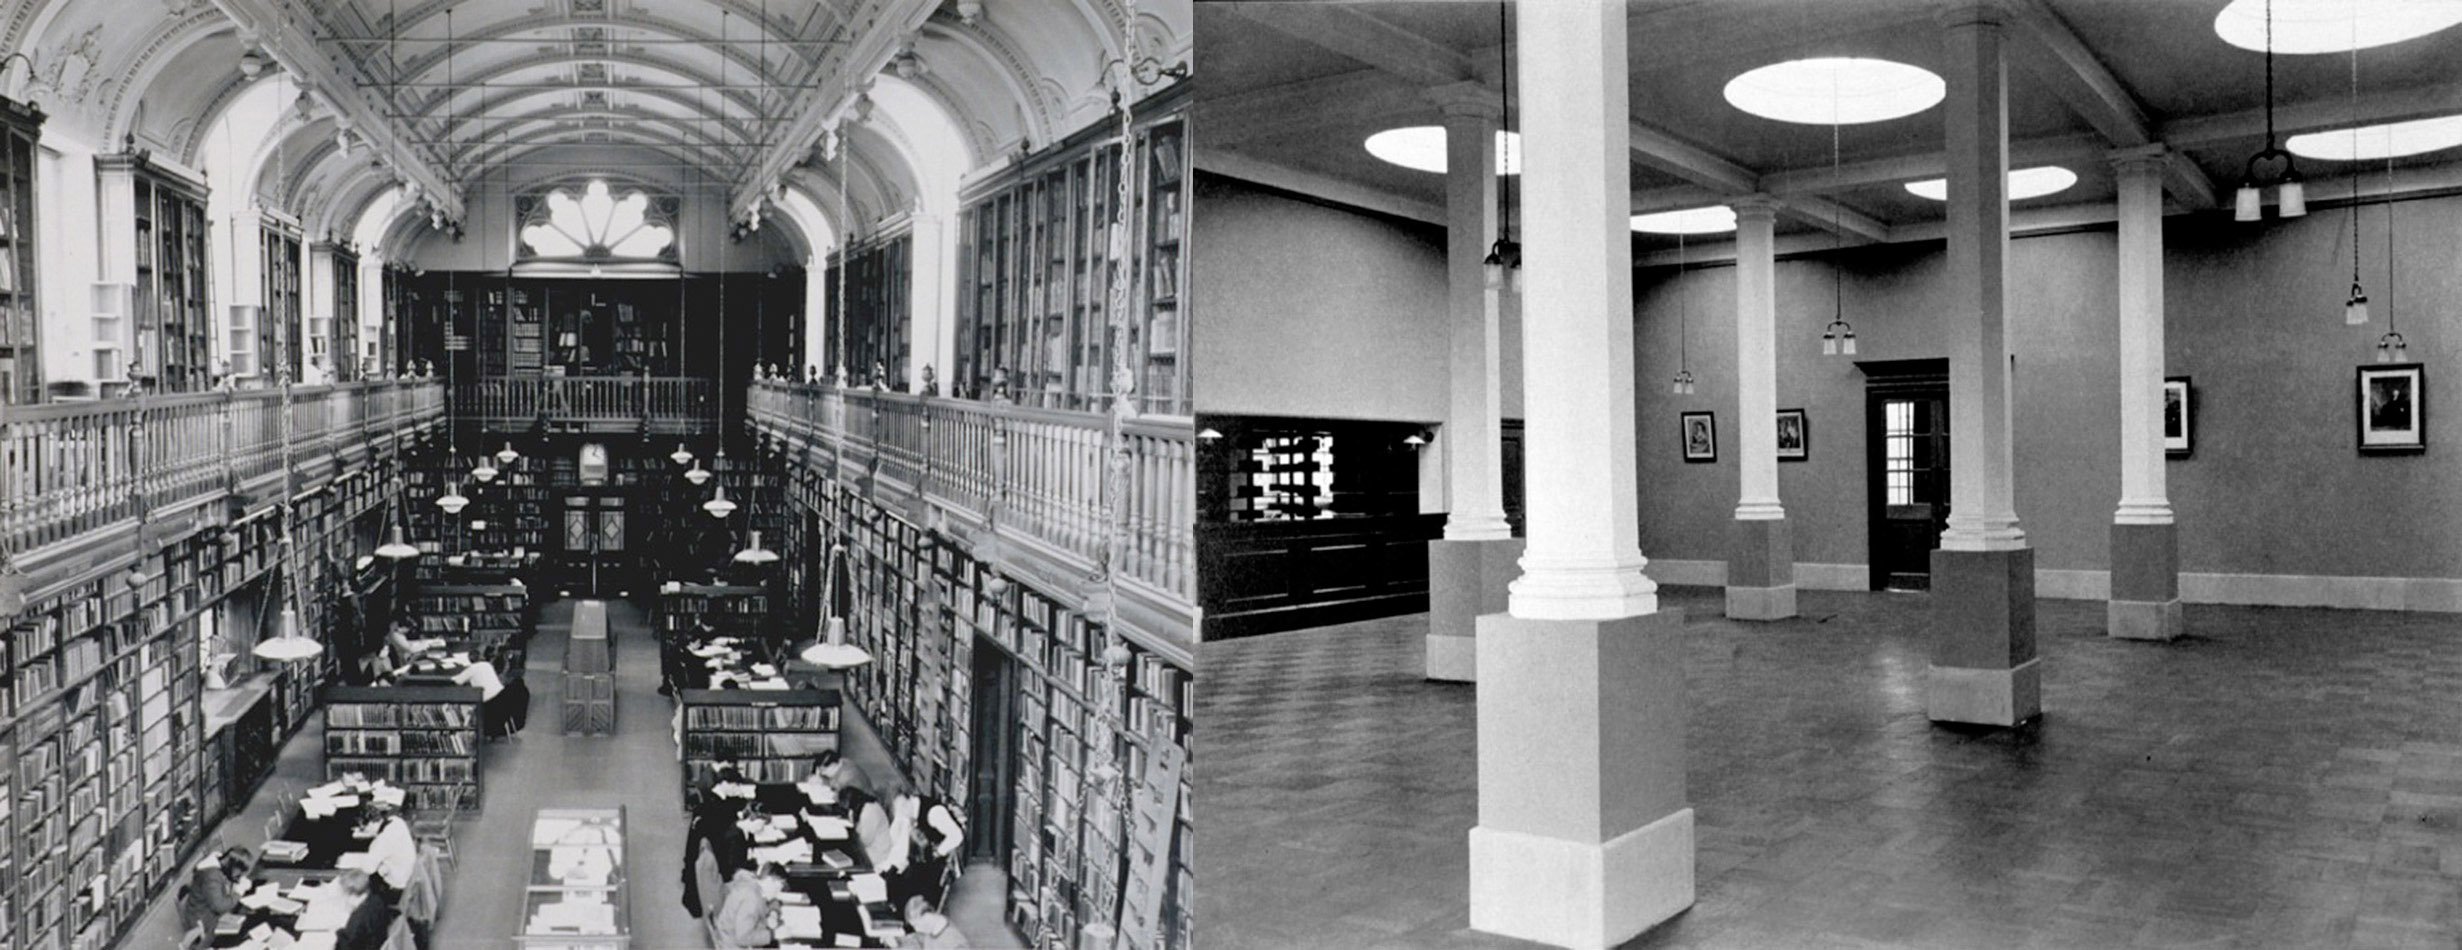 On the left, the Arts Reading Room of the Library in 1965, an extension built in 1888-89; on the right, the Science Reading Room in 1911, in the Carnegie Building extension of 1909. These were the two main reading rooms of the Library in 1972/73, and housed the books on open access in their respective subject areas. Photographs by G.M. Cowie (StAU-SouS-Lib-62) and Partick (StAU-SouS-Lib-21).